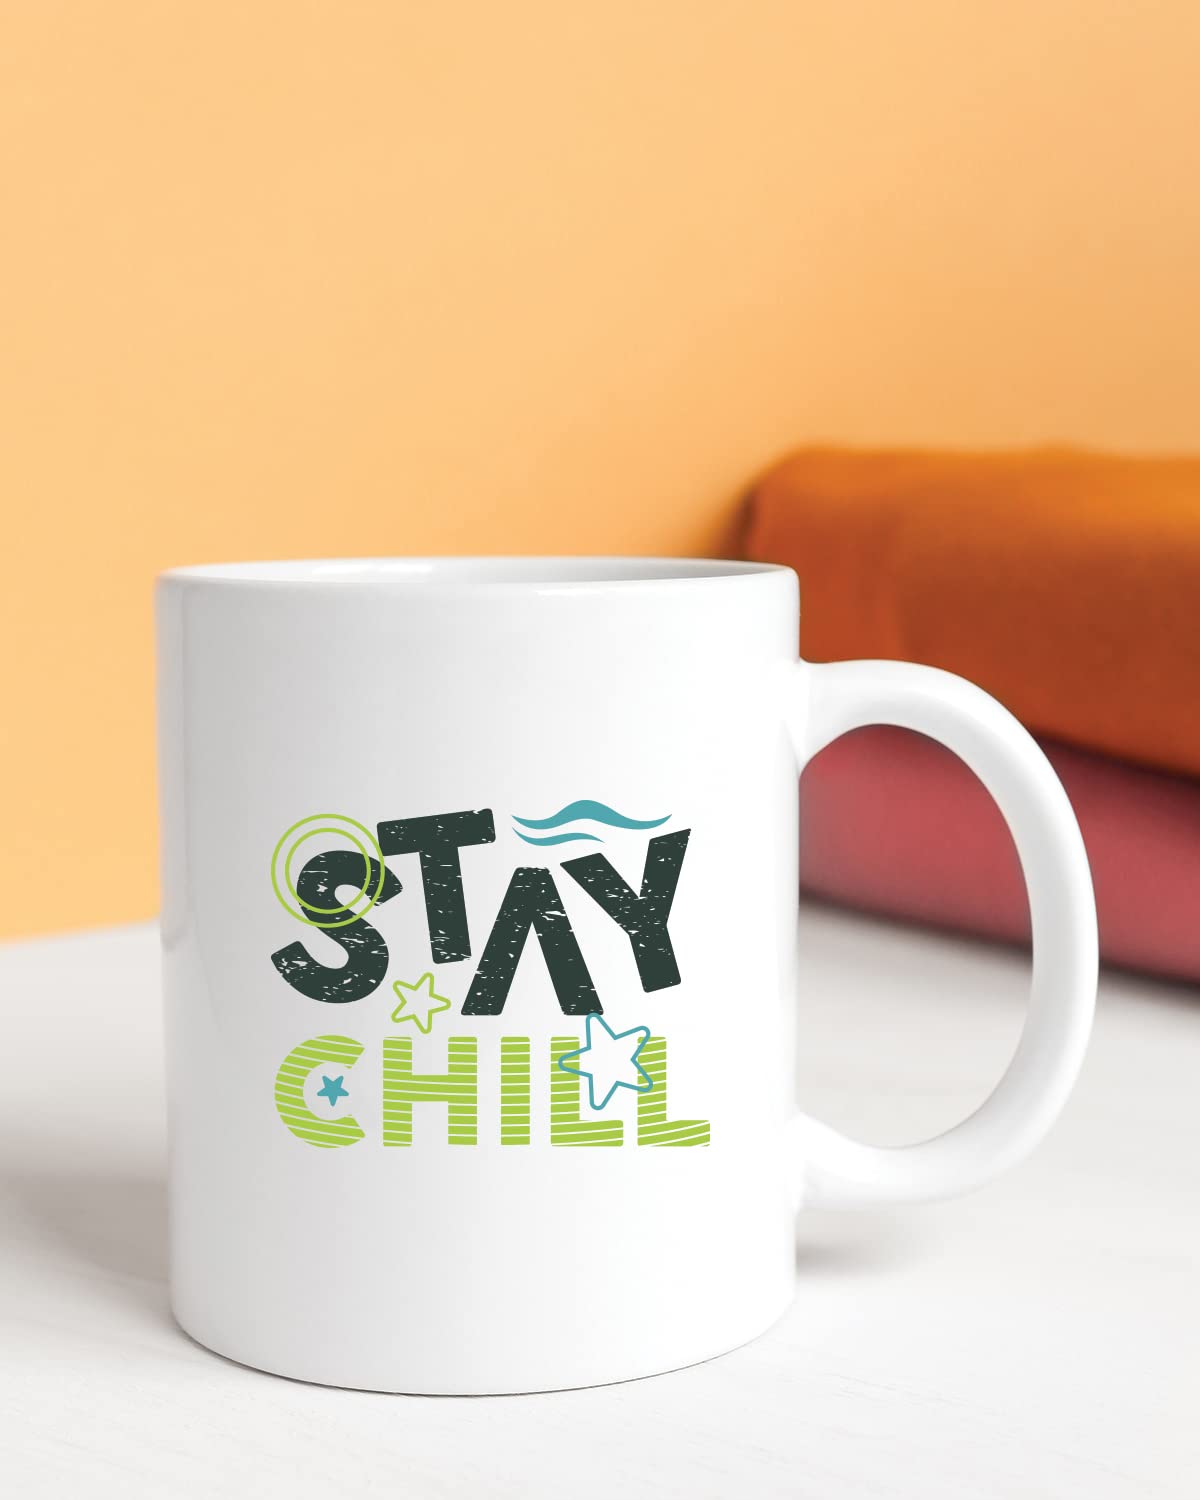 Stay CHILL Coffee Mug - Birthday Gift, Motivational Mug, Printed with Inspiring Quotes, Positivity Mug, Inspirational Gift for Him & Her, Best Friend Gift, Gifts for Her, Cheer Up Gift